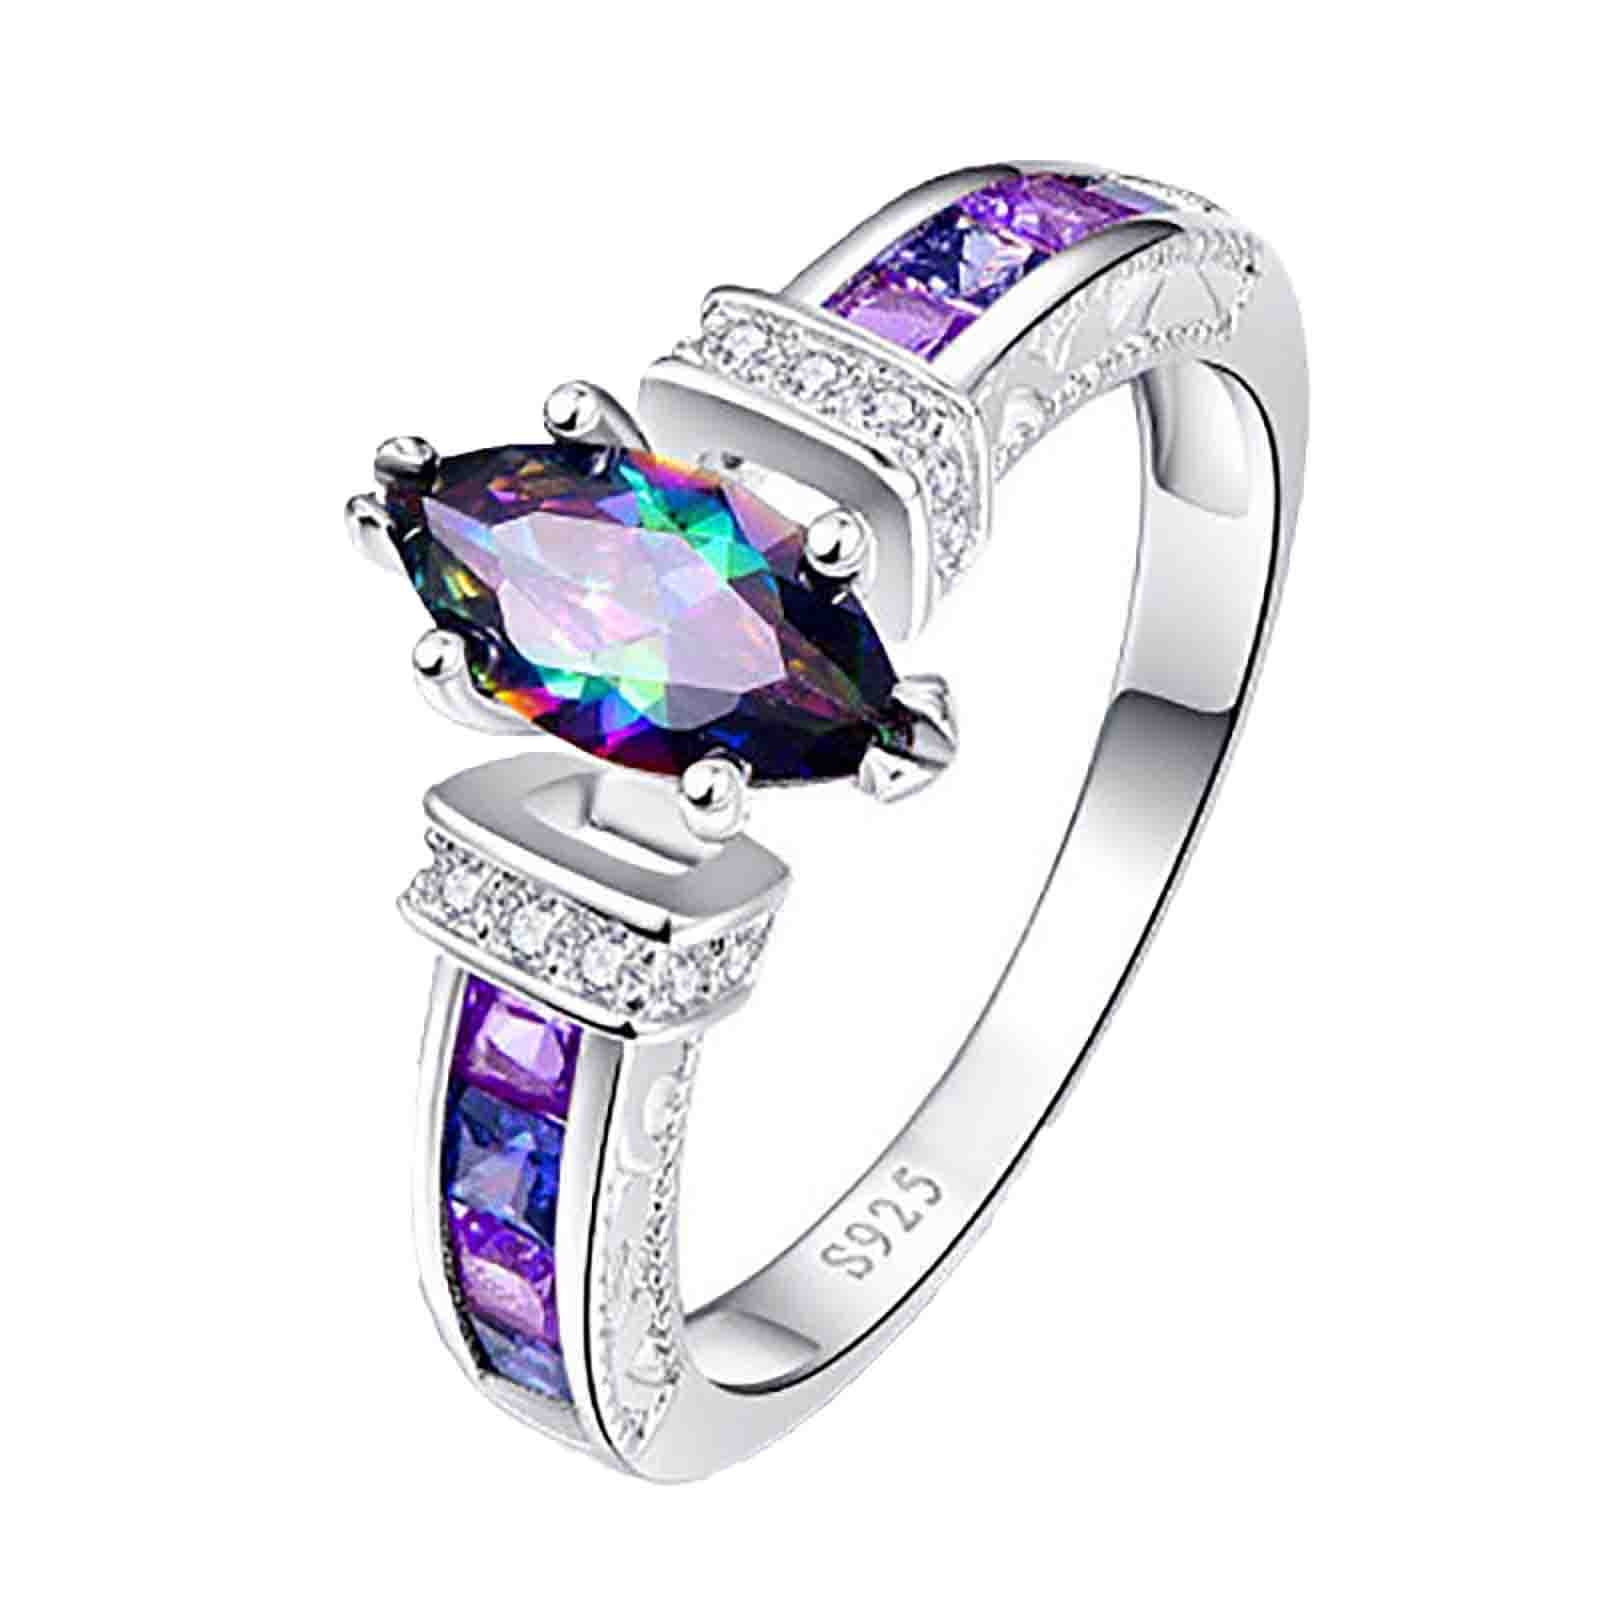 Fashion Women Plated Rose Gold Wedding Ring Purple Sapphire Cocktail US 6-10